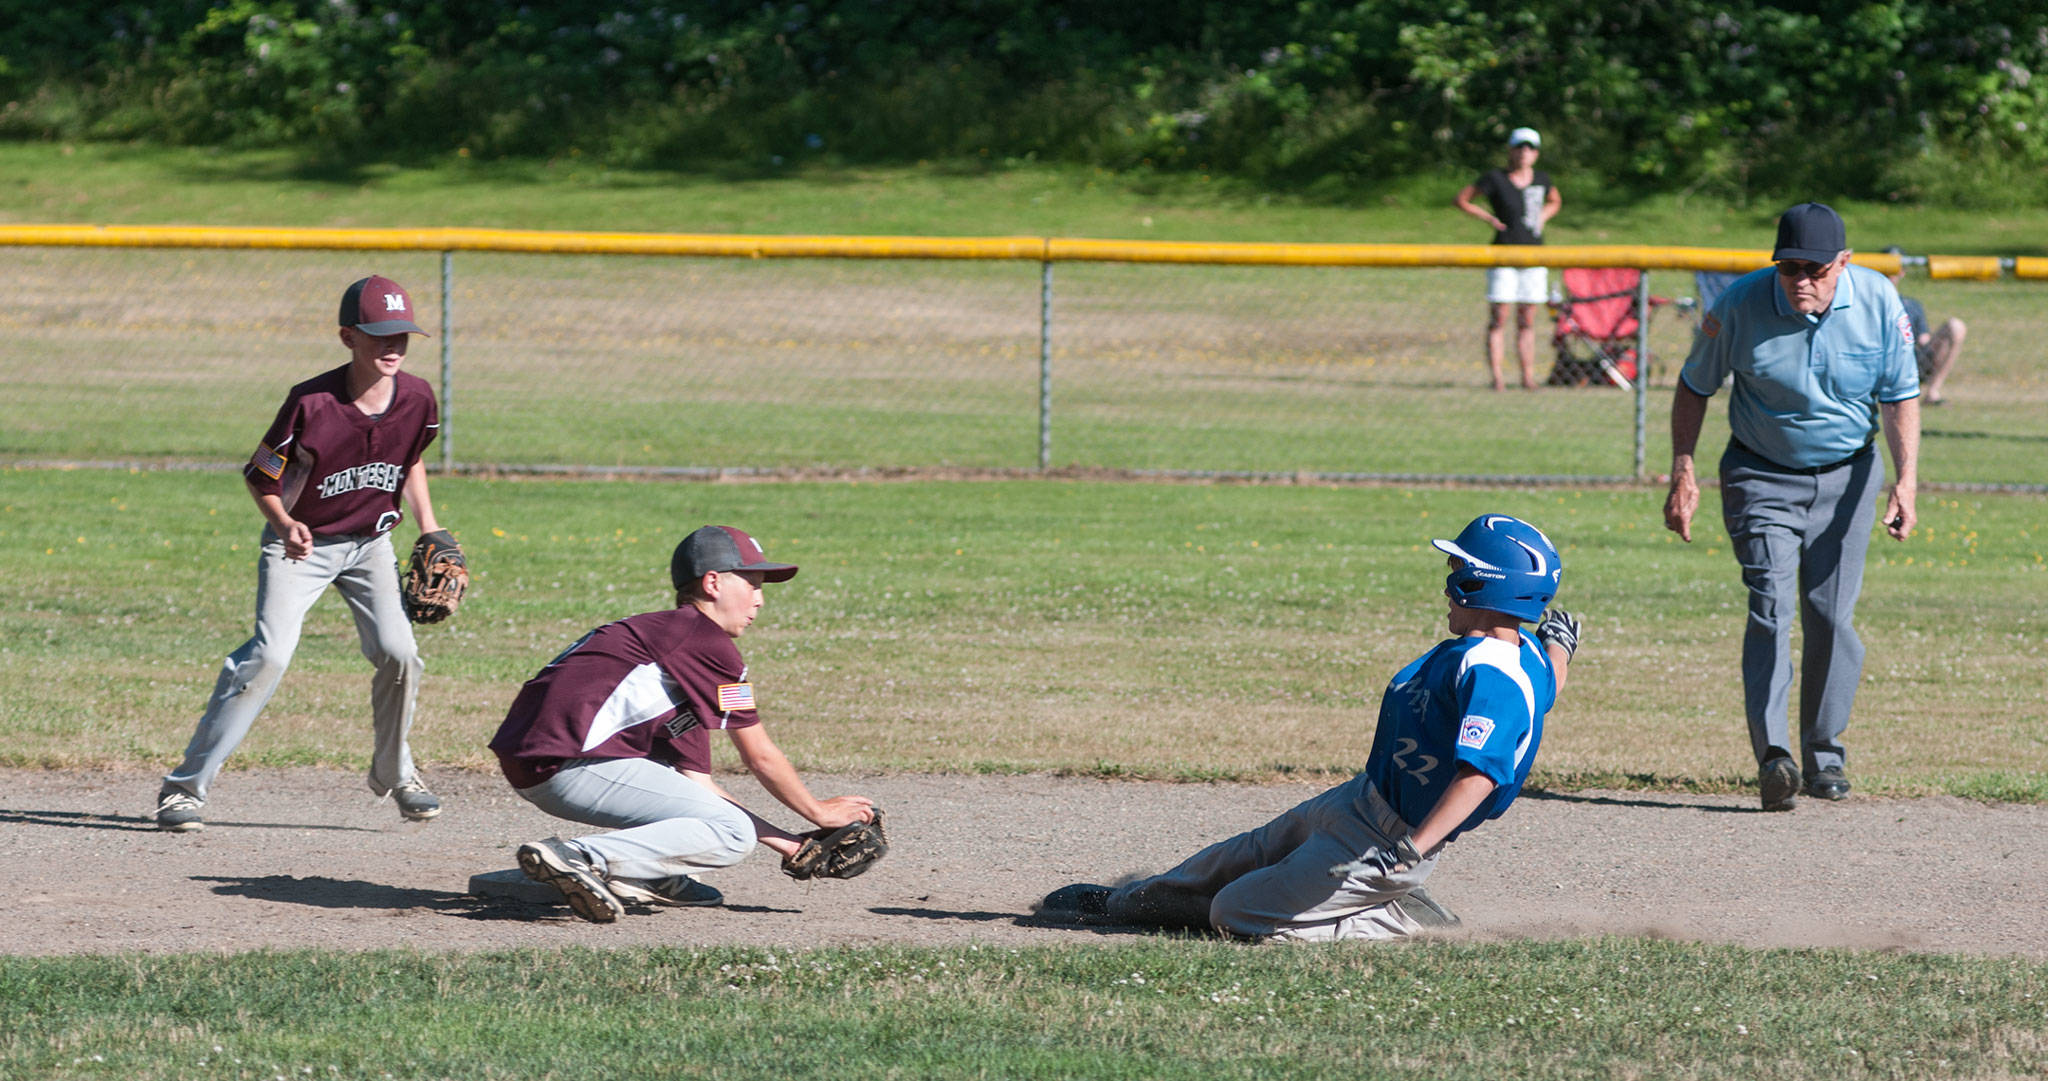 (Rob Burns | The Daily World) Montesano shortstop Jackson Busz waits for Elma’s Derik Meadows to tag him out on a stolen-base attempt early in Thursday’s District III 10-12 Majors winner’s bracket final contest at Tenino City Park in Tenino. Montesano earned a berth into Saturday’s district title game with a 12-1 win in four innings.